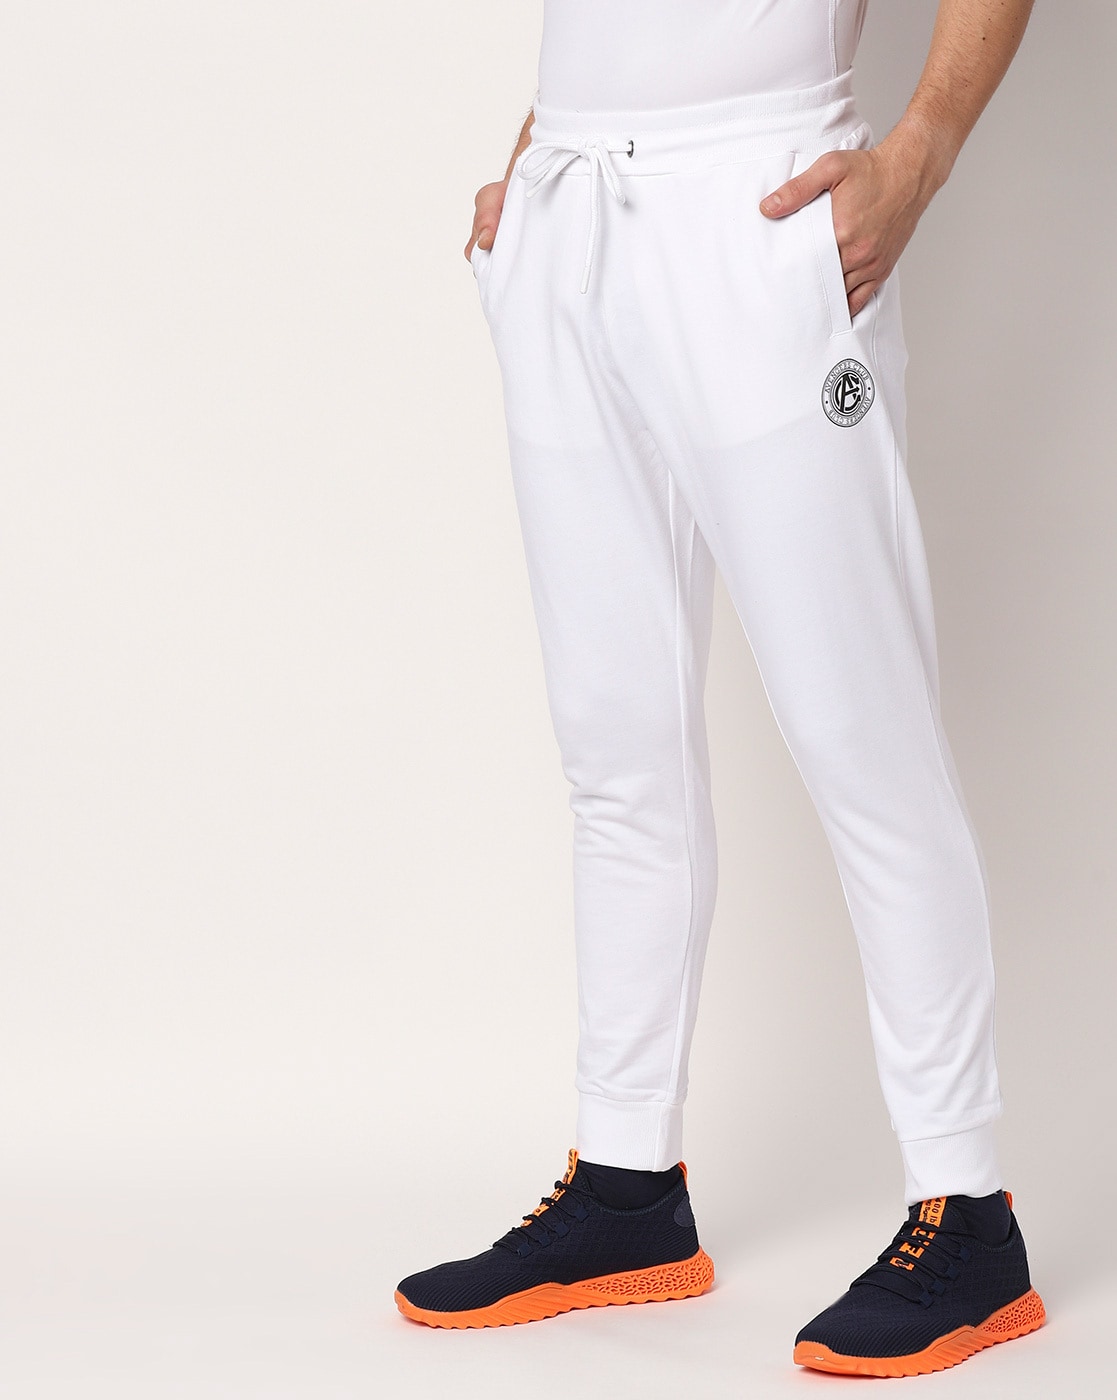 Buy Black & Navy Track Pants for Men by GUIDE Online | Ajio.com